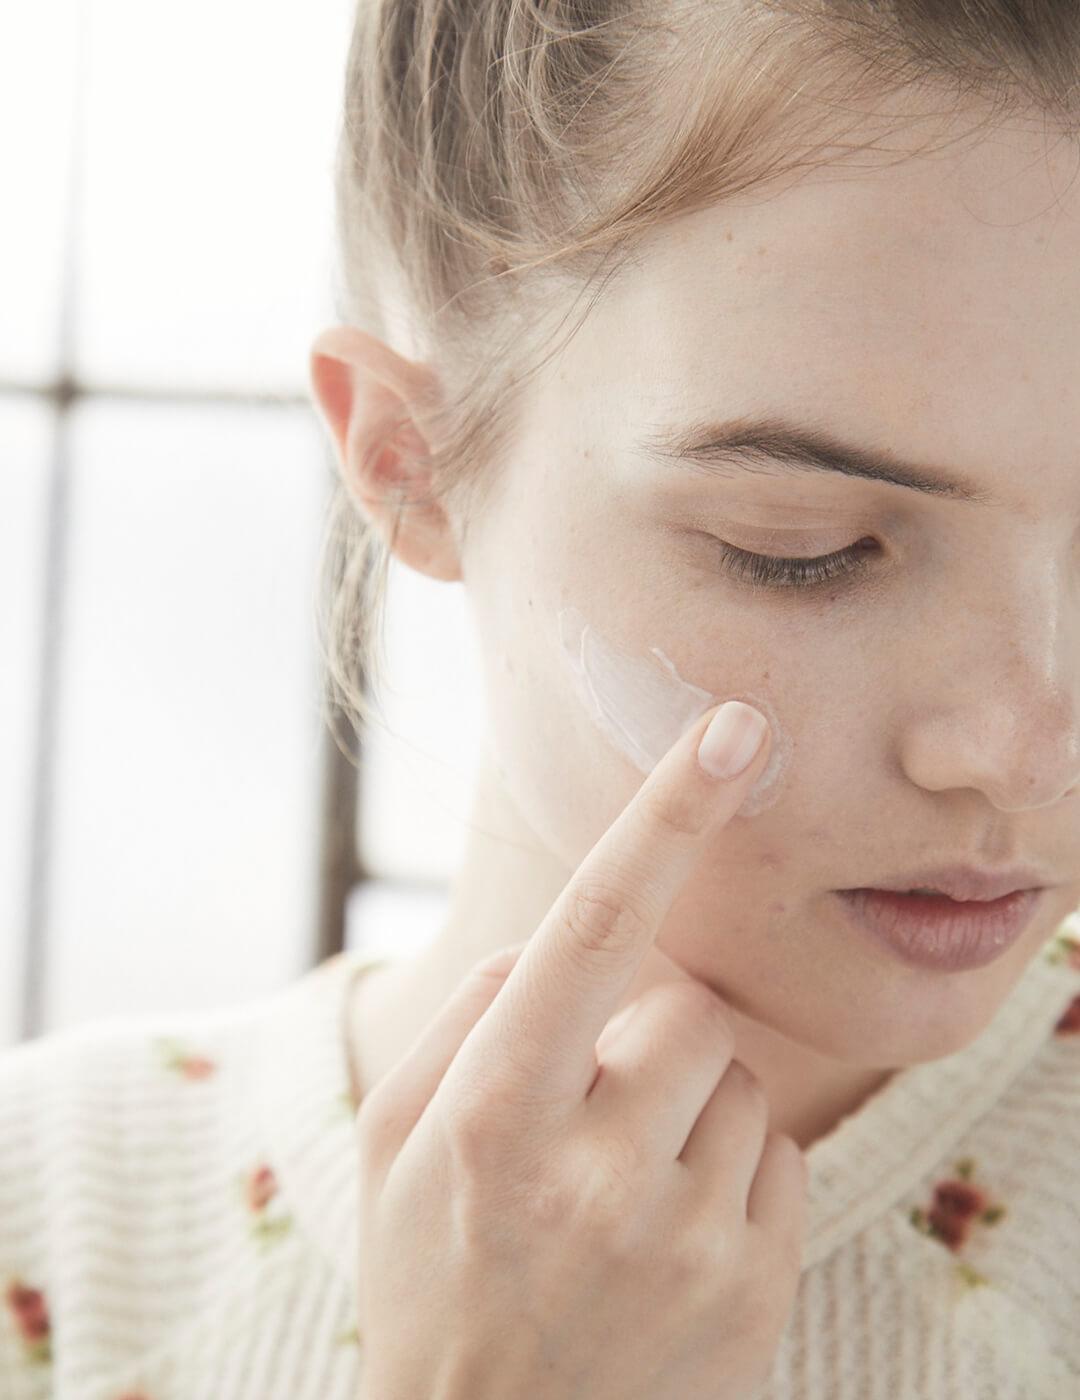 A close-up image of a model applying cream on her cheek